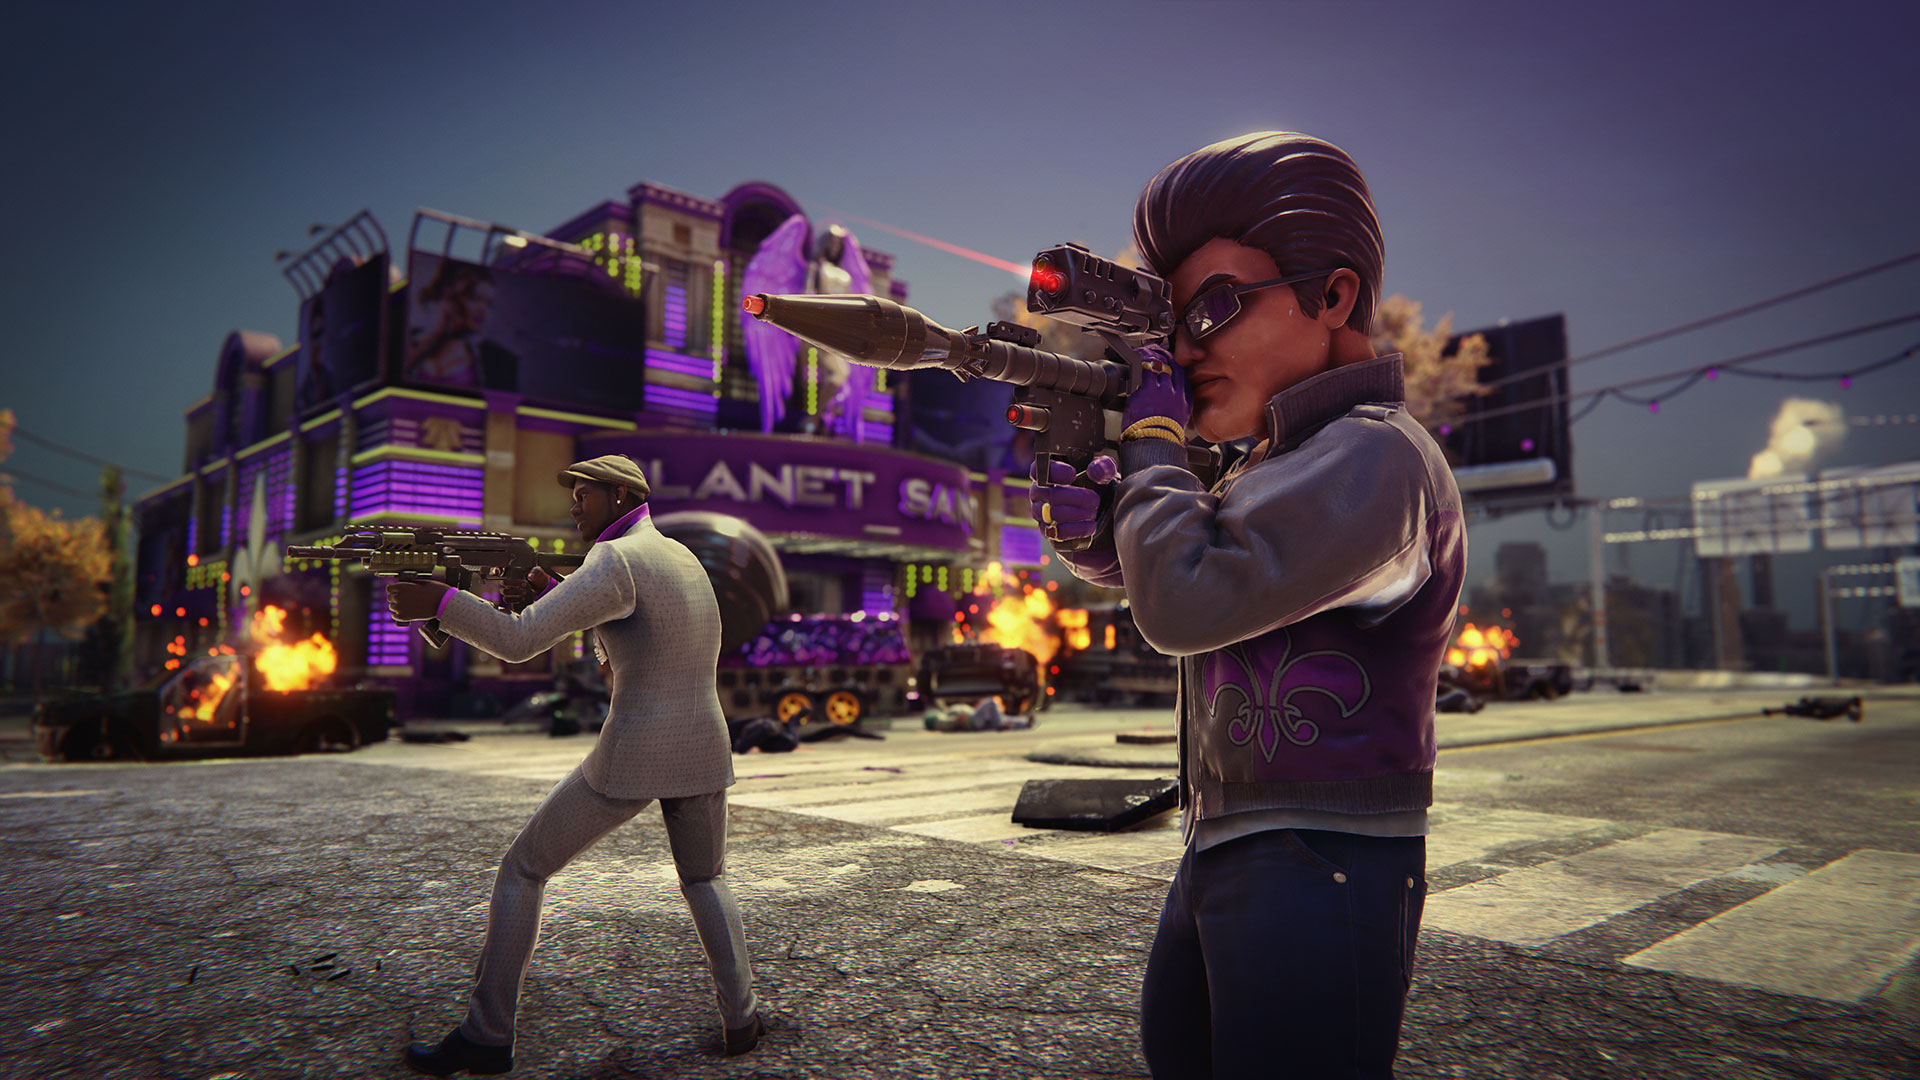 Saints Row: The Third Remastered - IGN